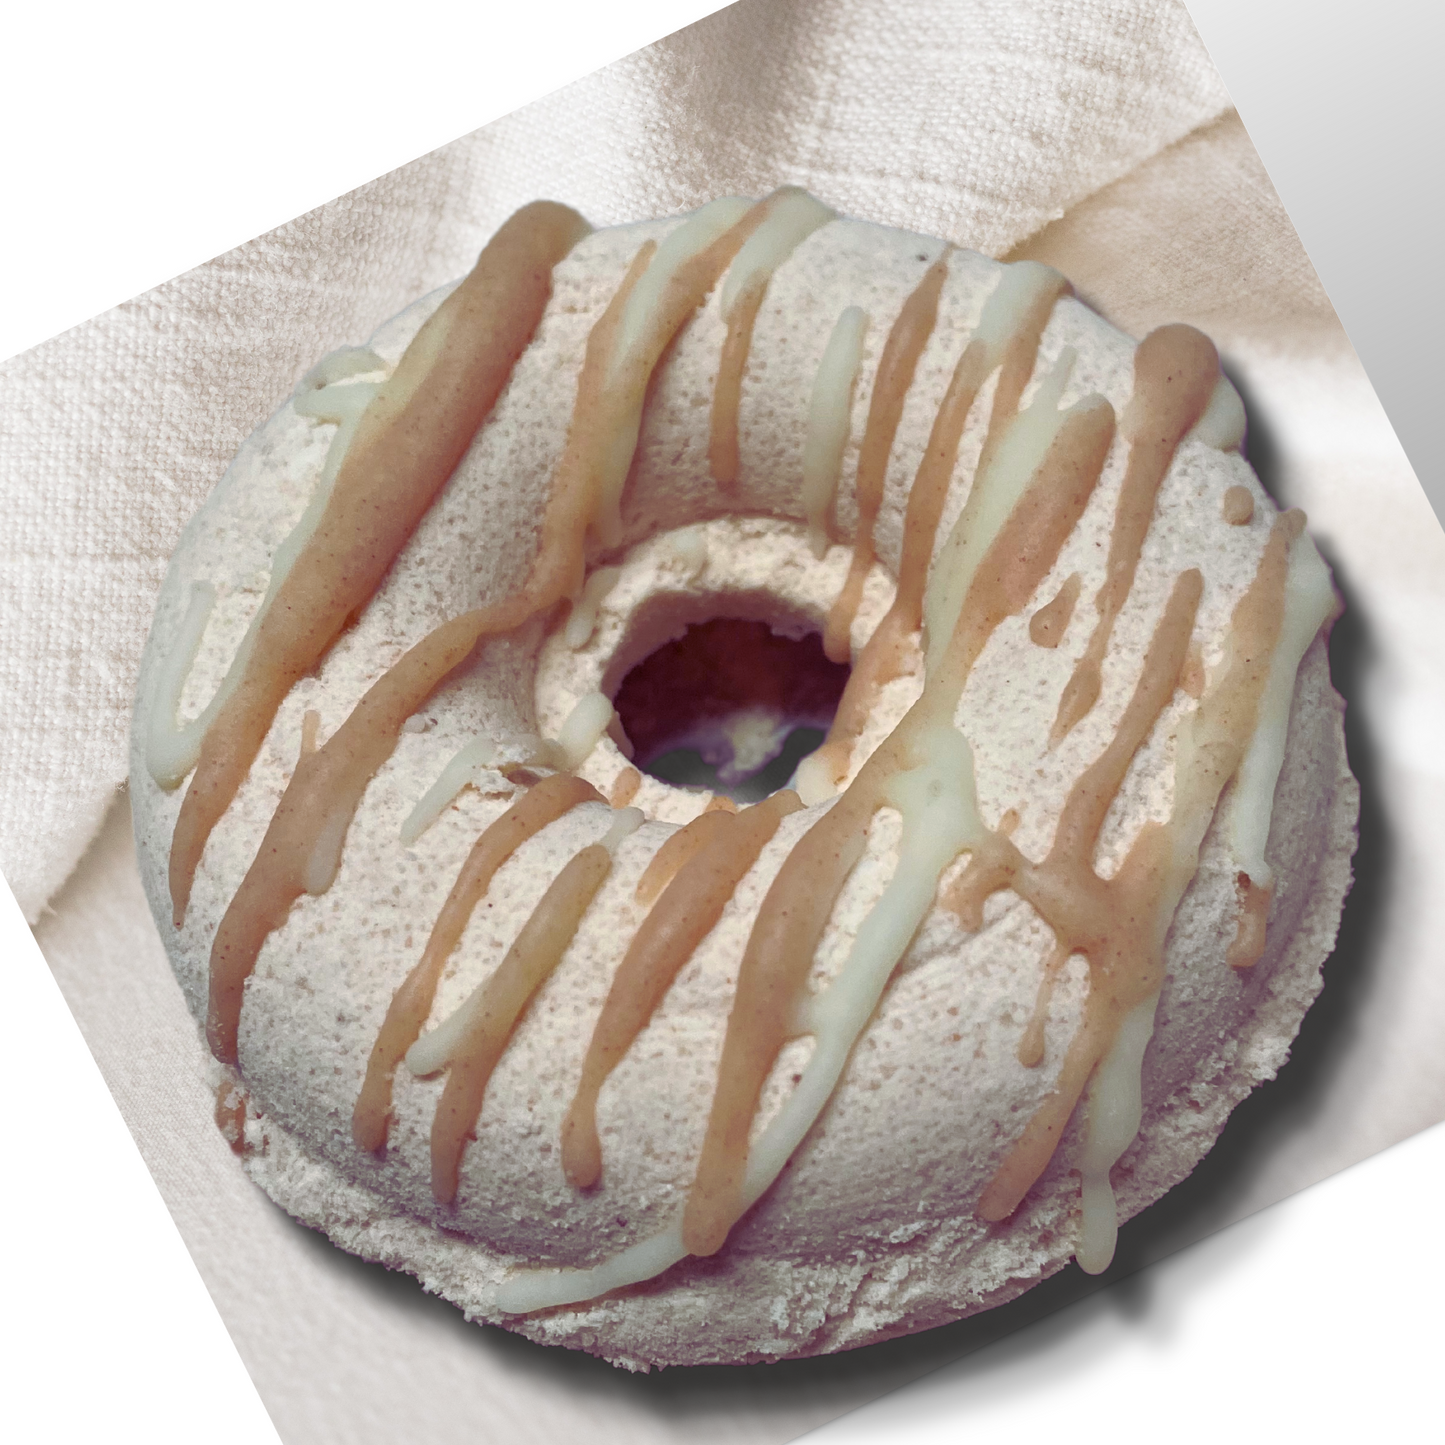 Lemongrass Orange Donut Bath Bomb- Farmhouse Charm is made with plant-based ingredients and infused only with essential oils. This bath bomb uses Kaolin clay for color and contains moisturizing ingredients such as coconut oil, cocoa butter, and colloidal oatmeal. It does not contain any artificial colorants and fragrance. To Use: Drop or hold in bath water. Enjoy the fizzing action, wonderful aromas and nourishing oils.